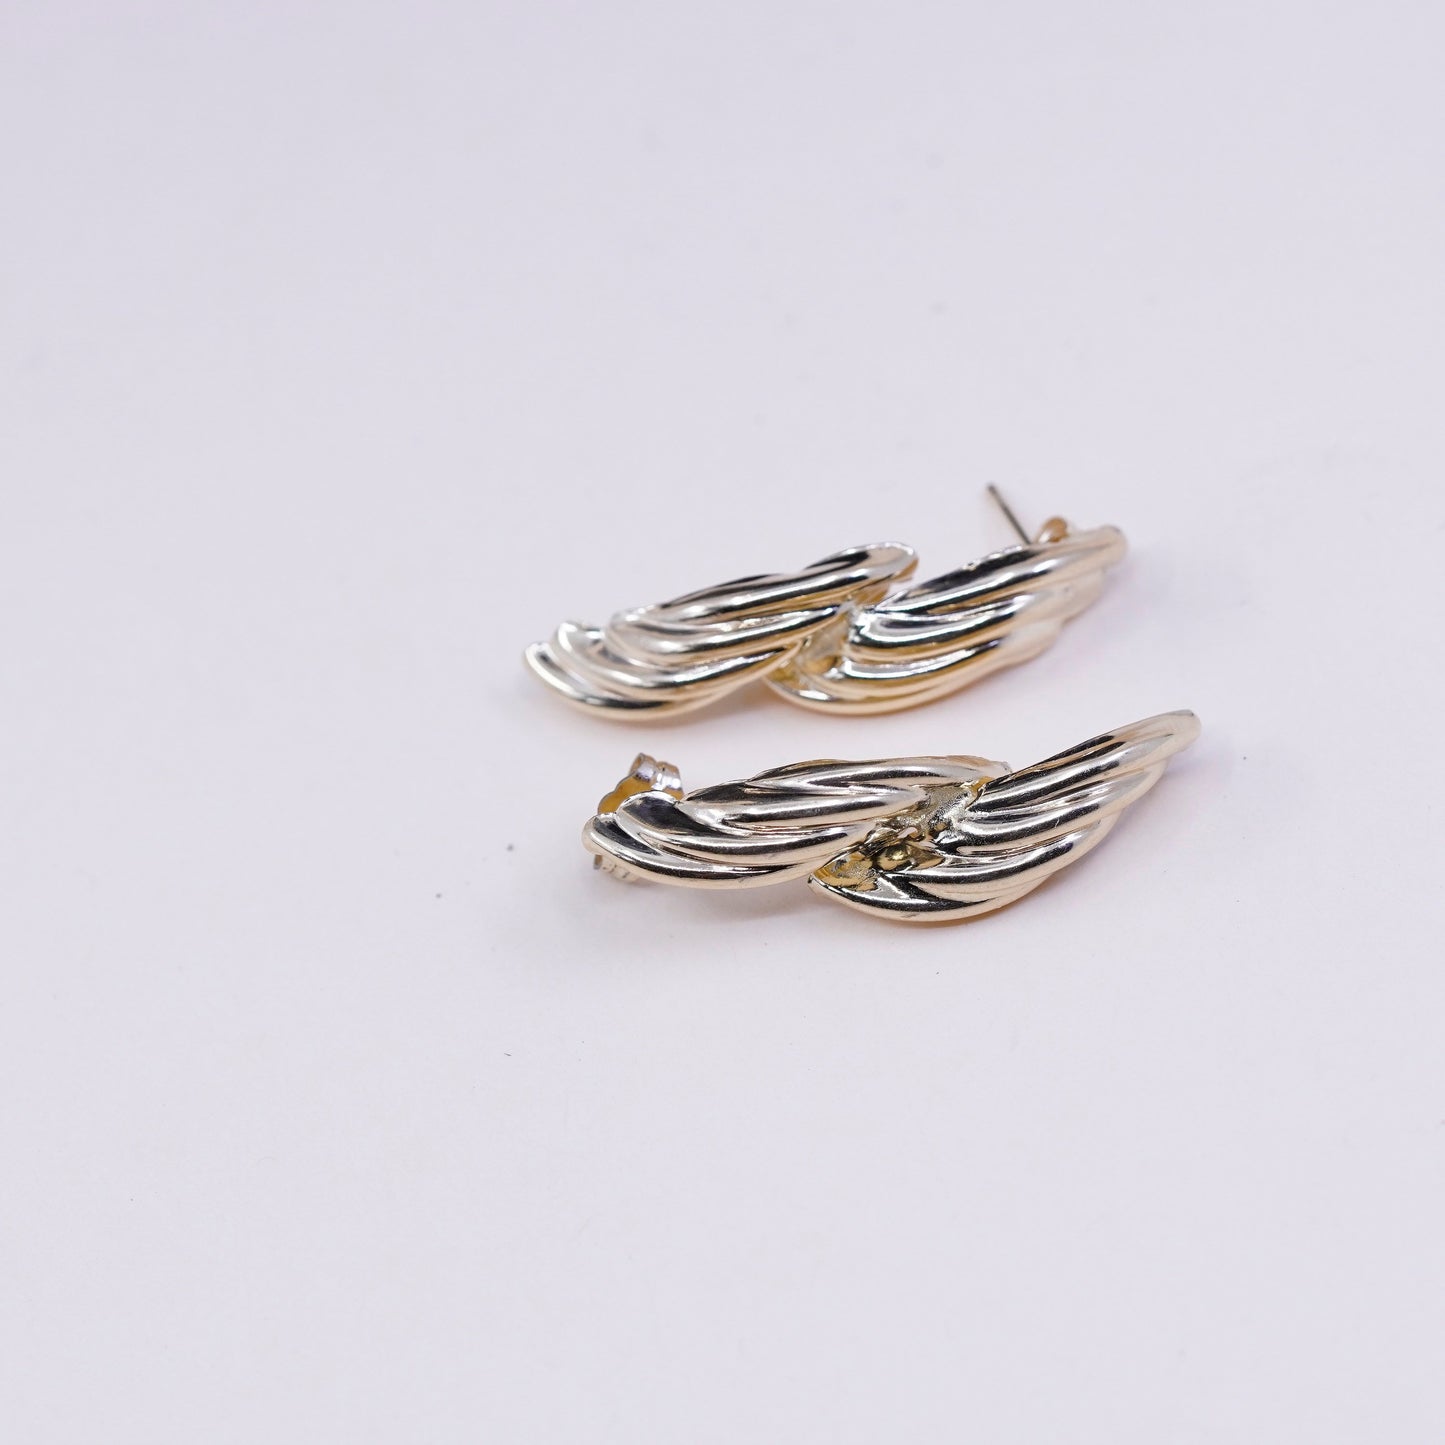 1.2g, vintage 14K yellow gold earrings, real gold ribbed shell studs , stamped 14K PPC